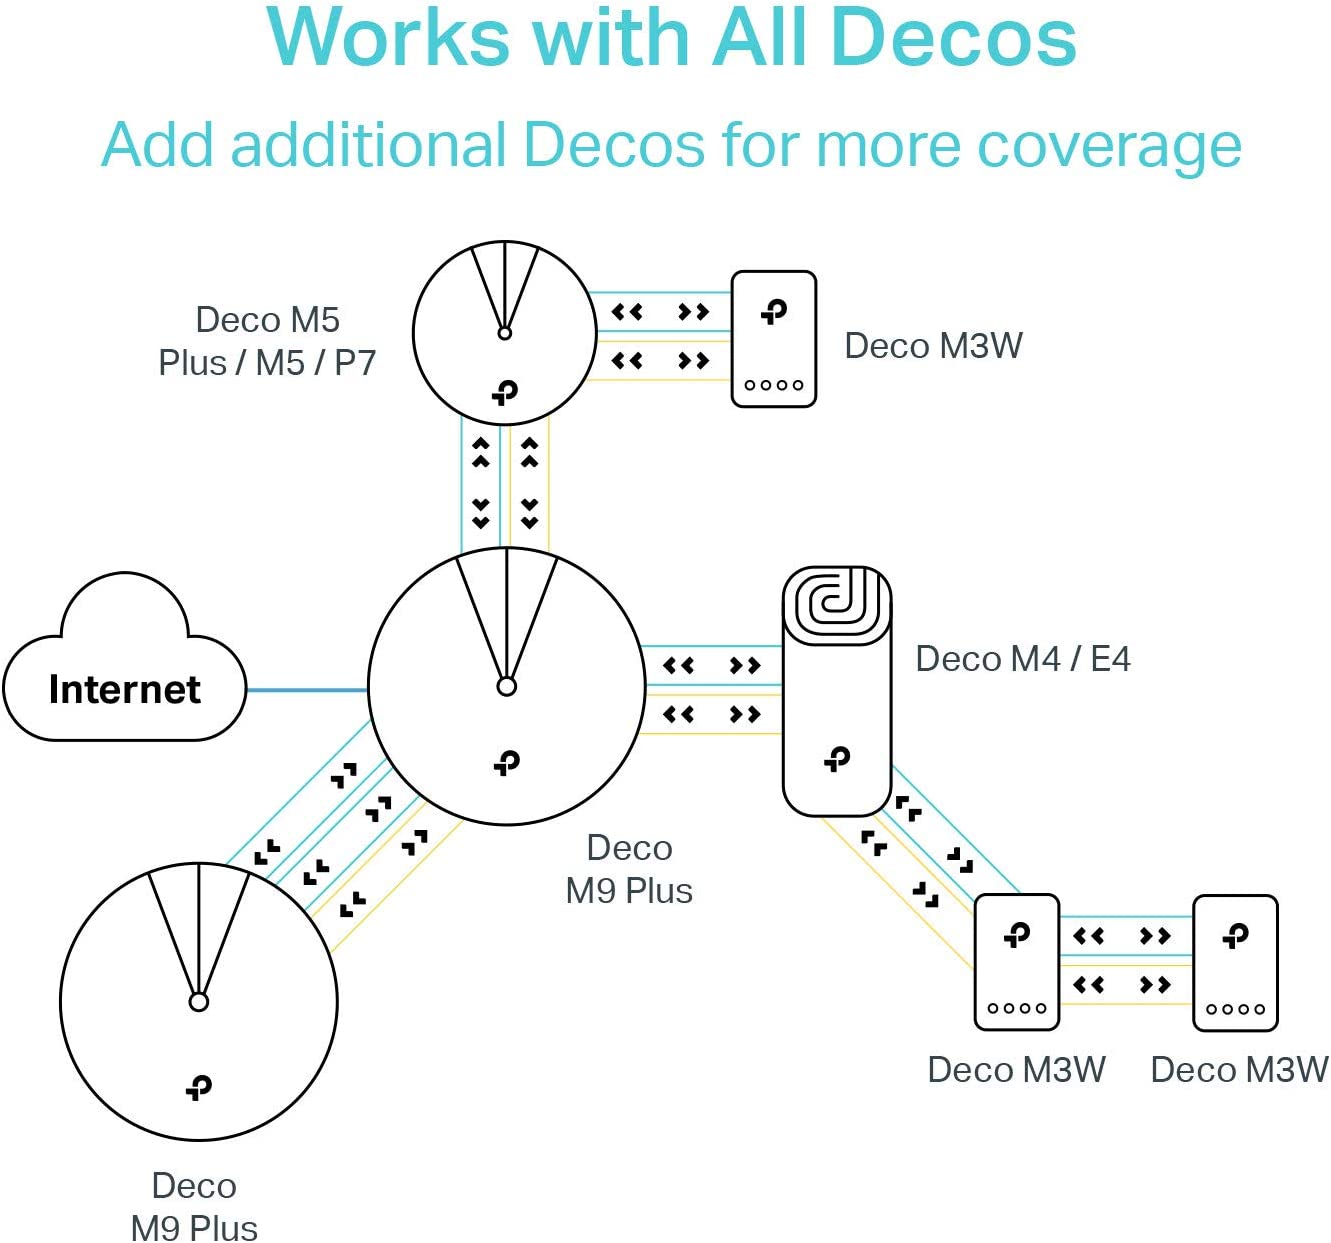 TP-Link Deco Whole Home Mesh WiFi System(Deco M3W) √É¬¢√¢‚Äö¬¨√¢‚Ç¨≈ì Seamless Roaming, Adaptive Routing, Compact Plug-in Design, Up to 1,600 Sq. ft, Add-On Unit, Only Works with TP-Link Deco Mesh WiFi